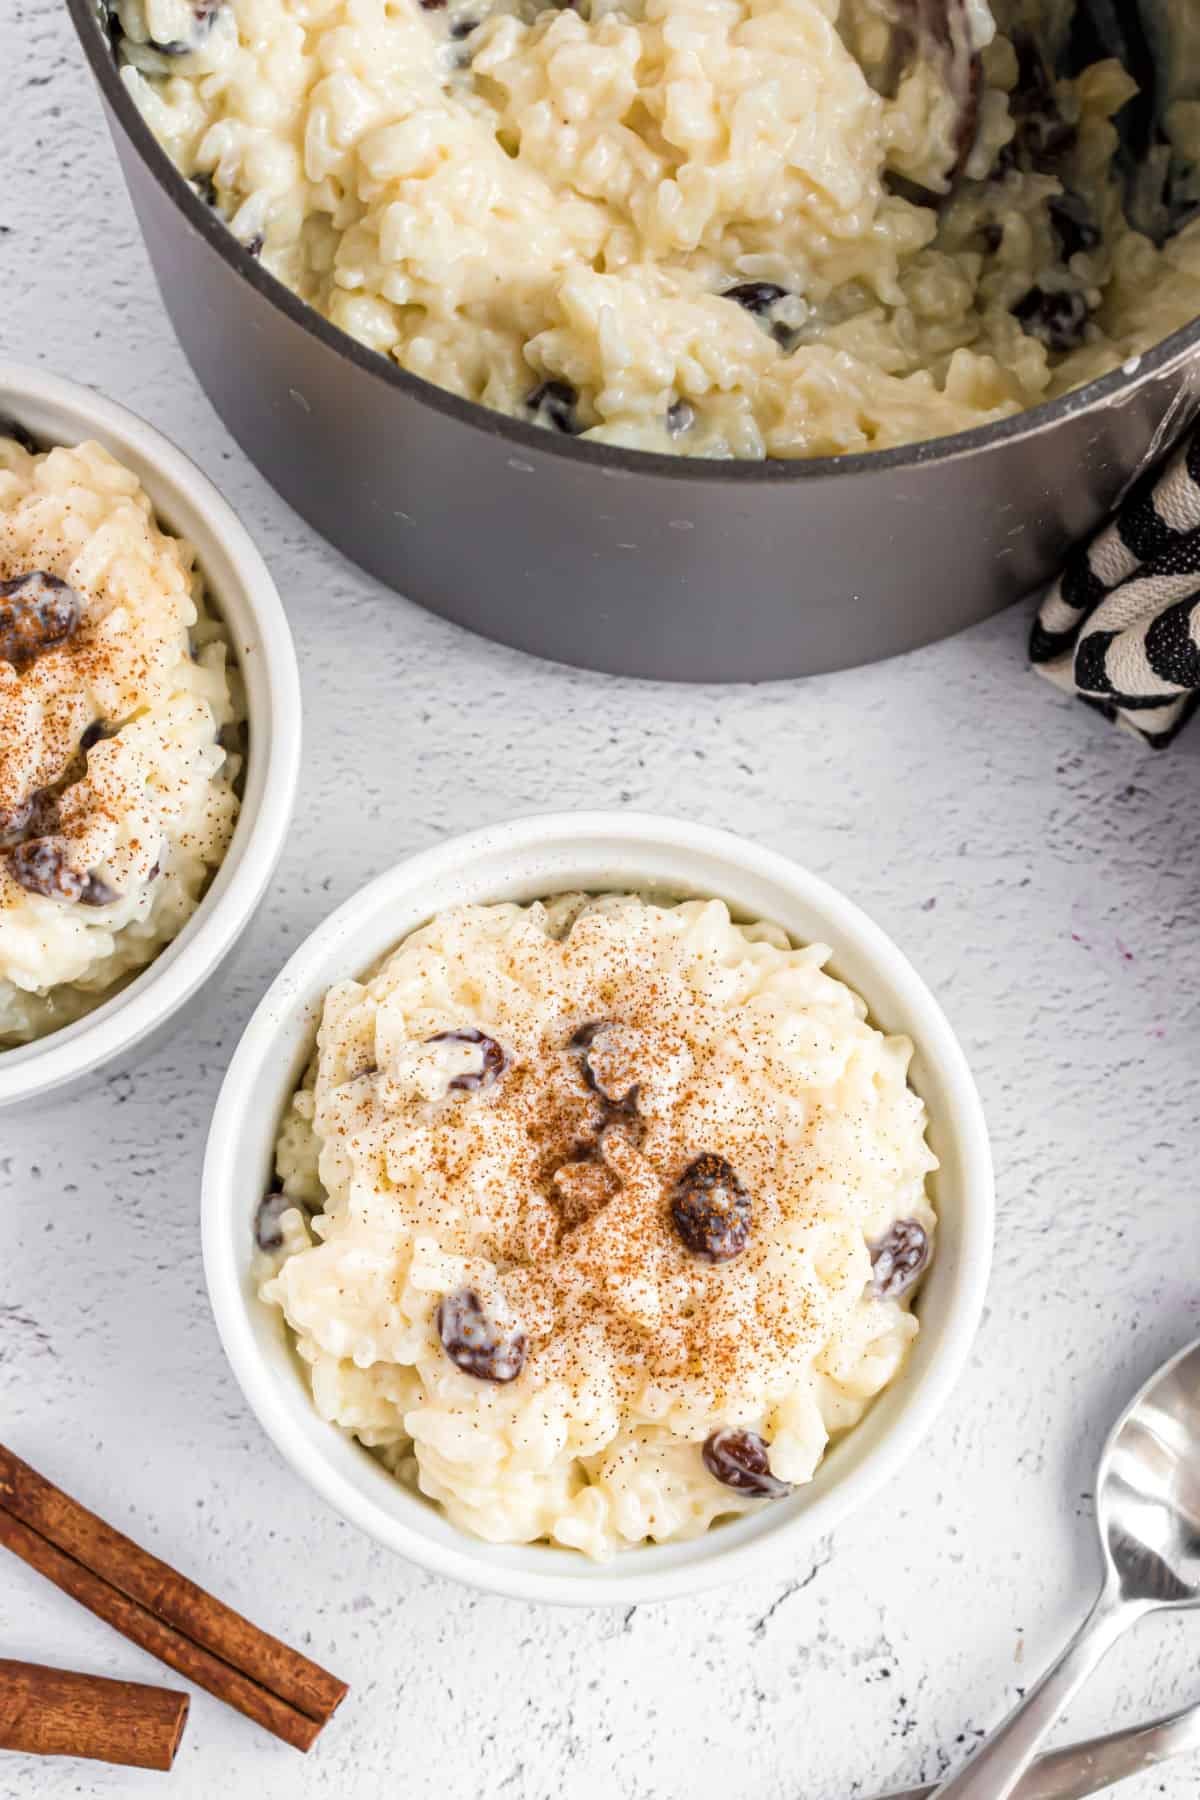 Rice pudding served in small bowls and sprinkled with cinnamon.